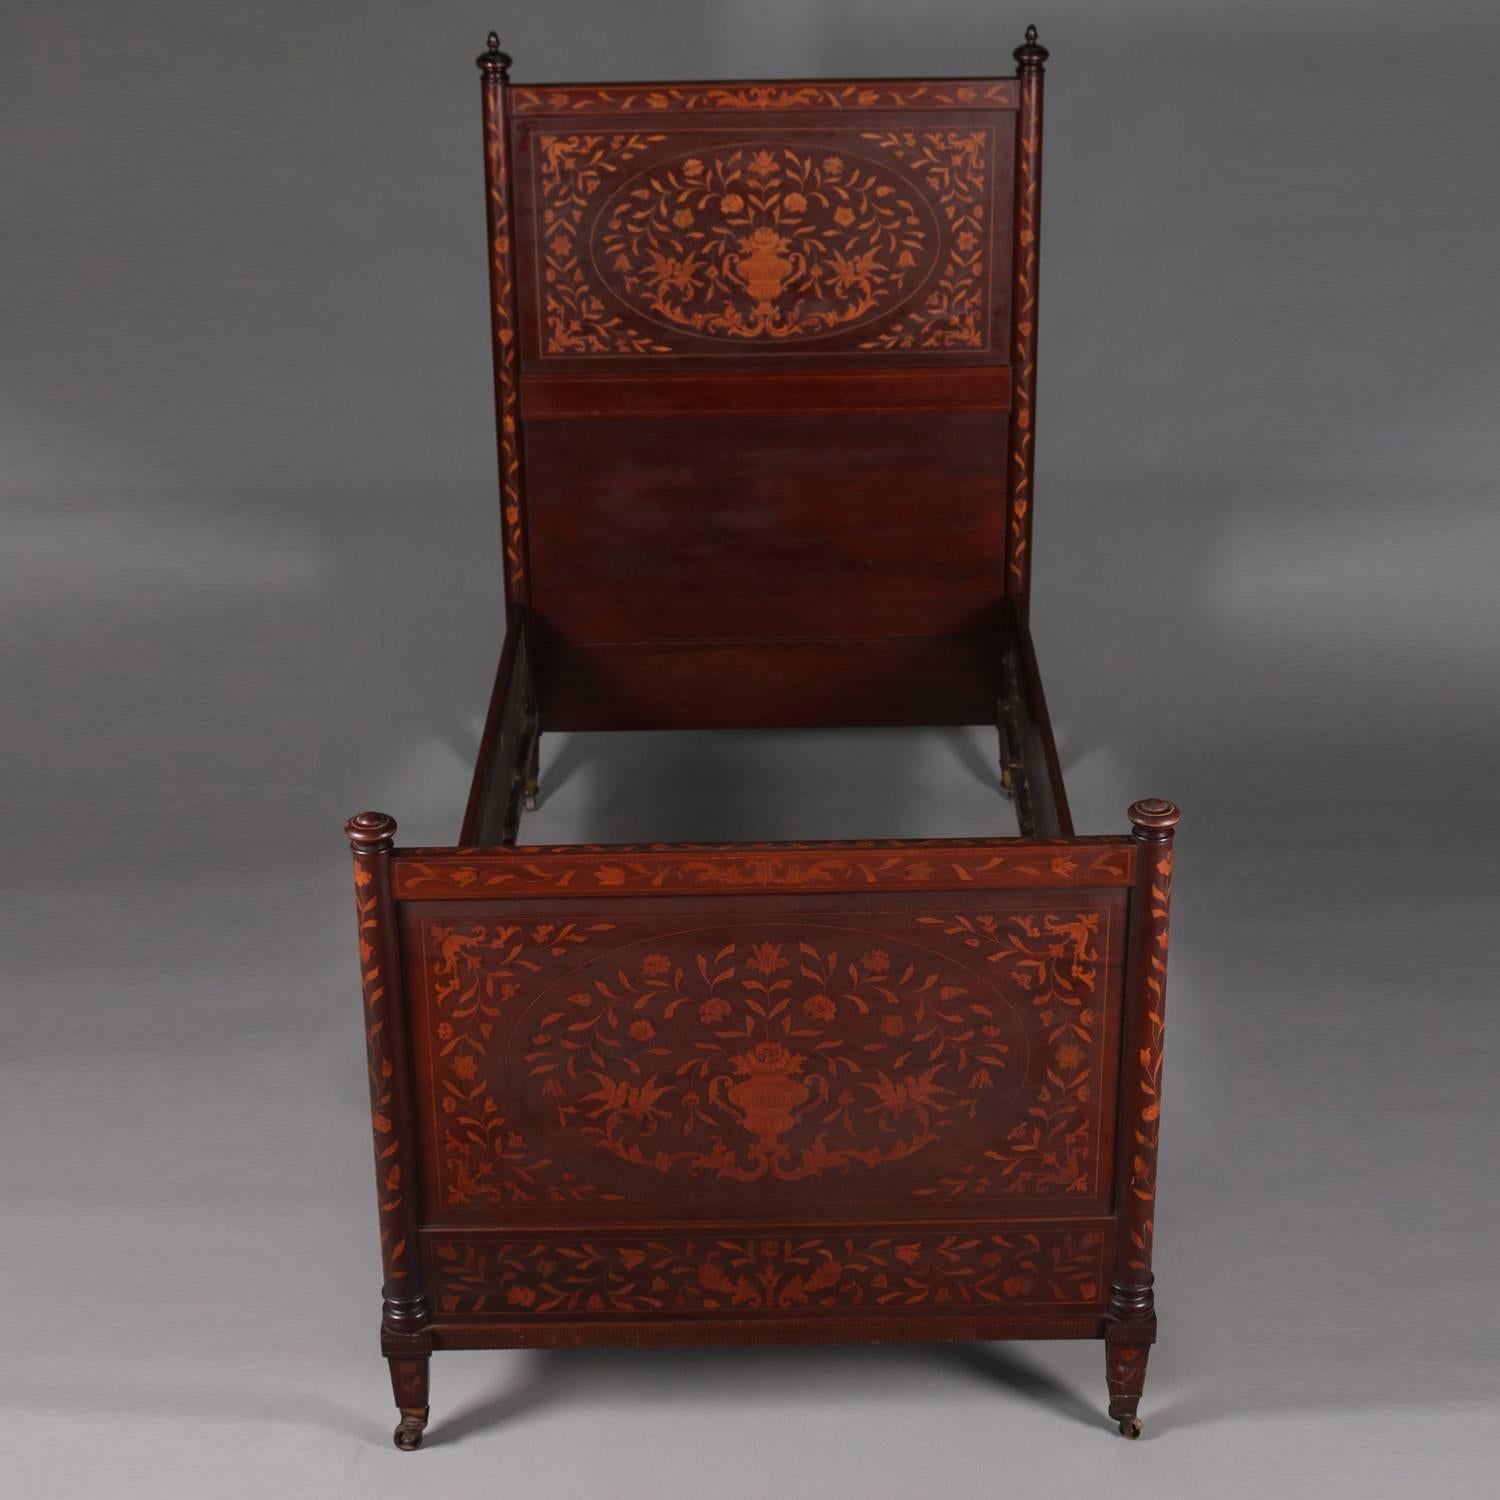 Dutch Marquetry twin bed frame by Geo. C. Flint & Co., NY features overall foliate, floral and urn satinwood inlay with banding, original label, seated on casters, circa 1870

Measures: 64.5